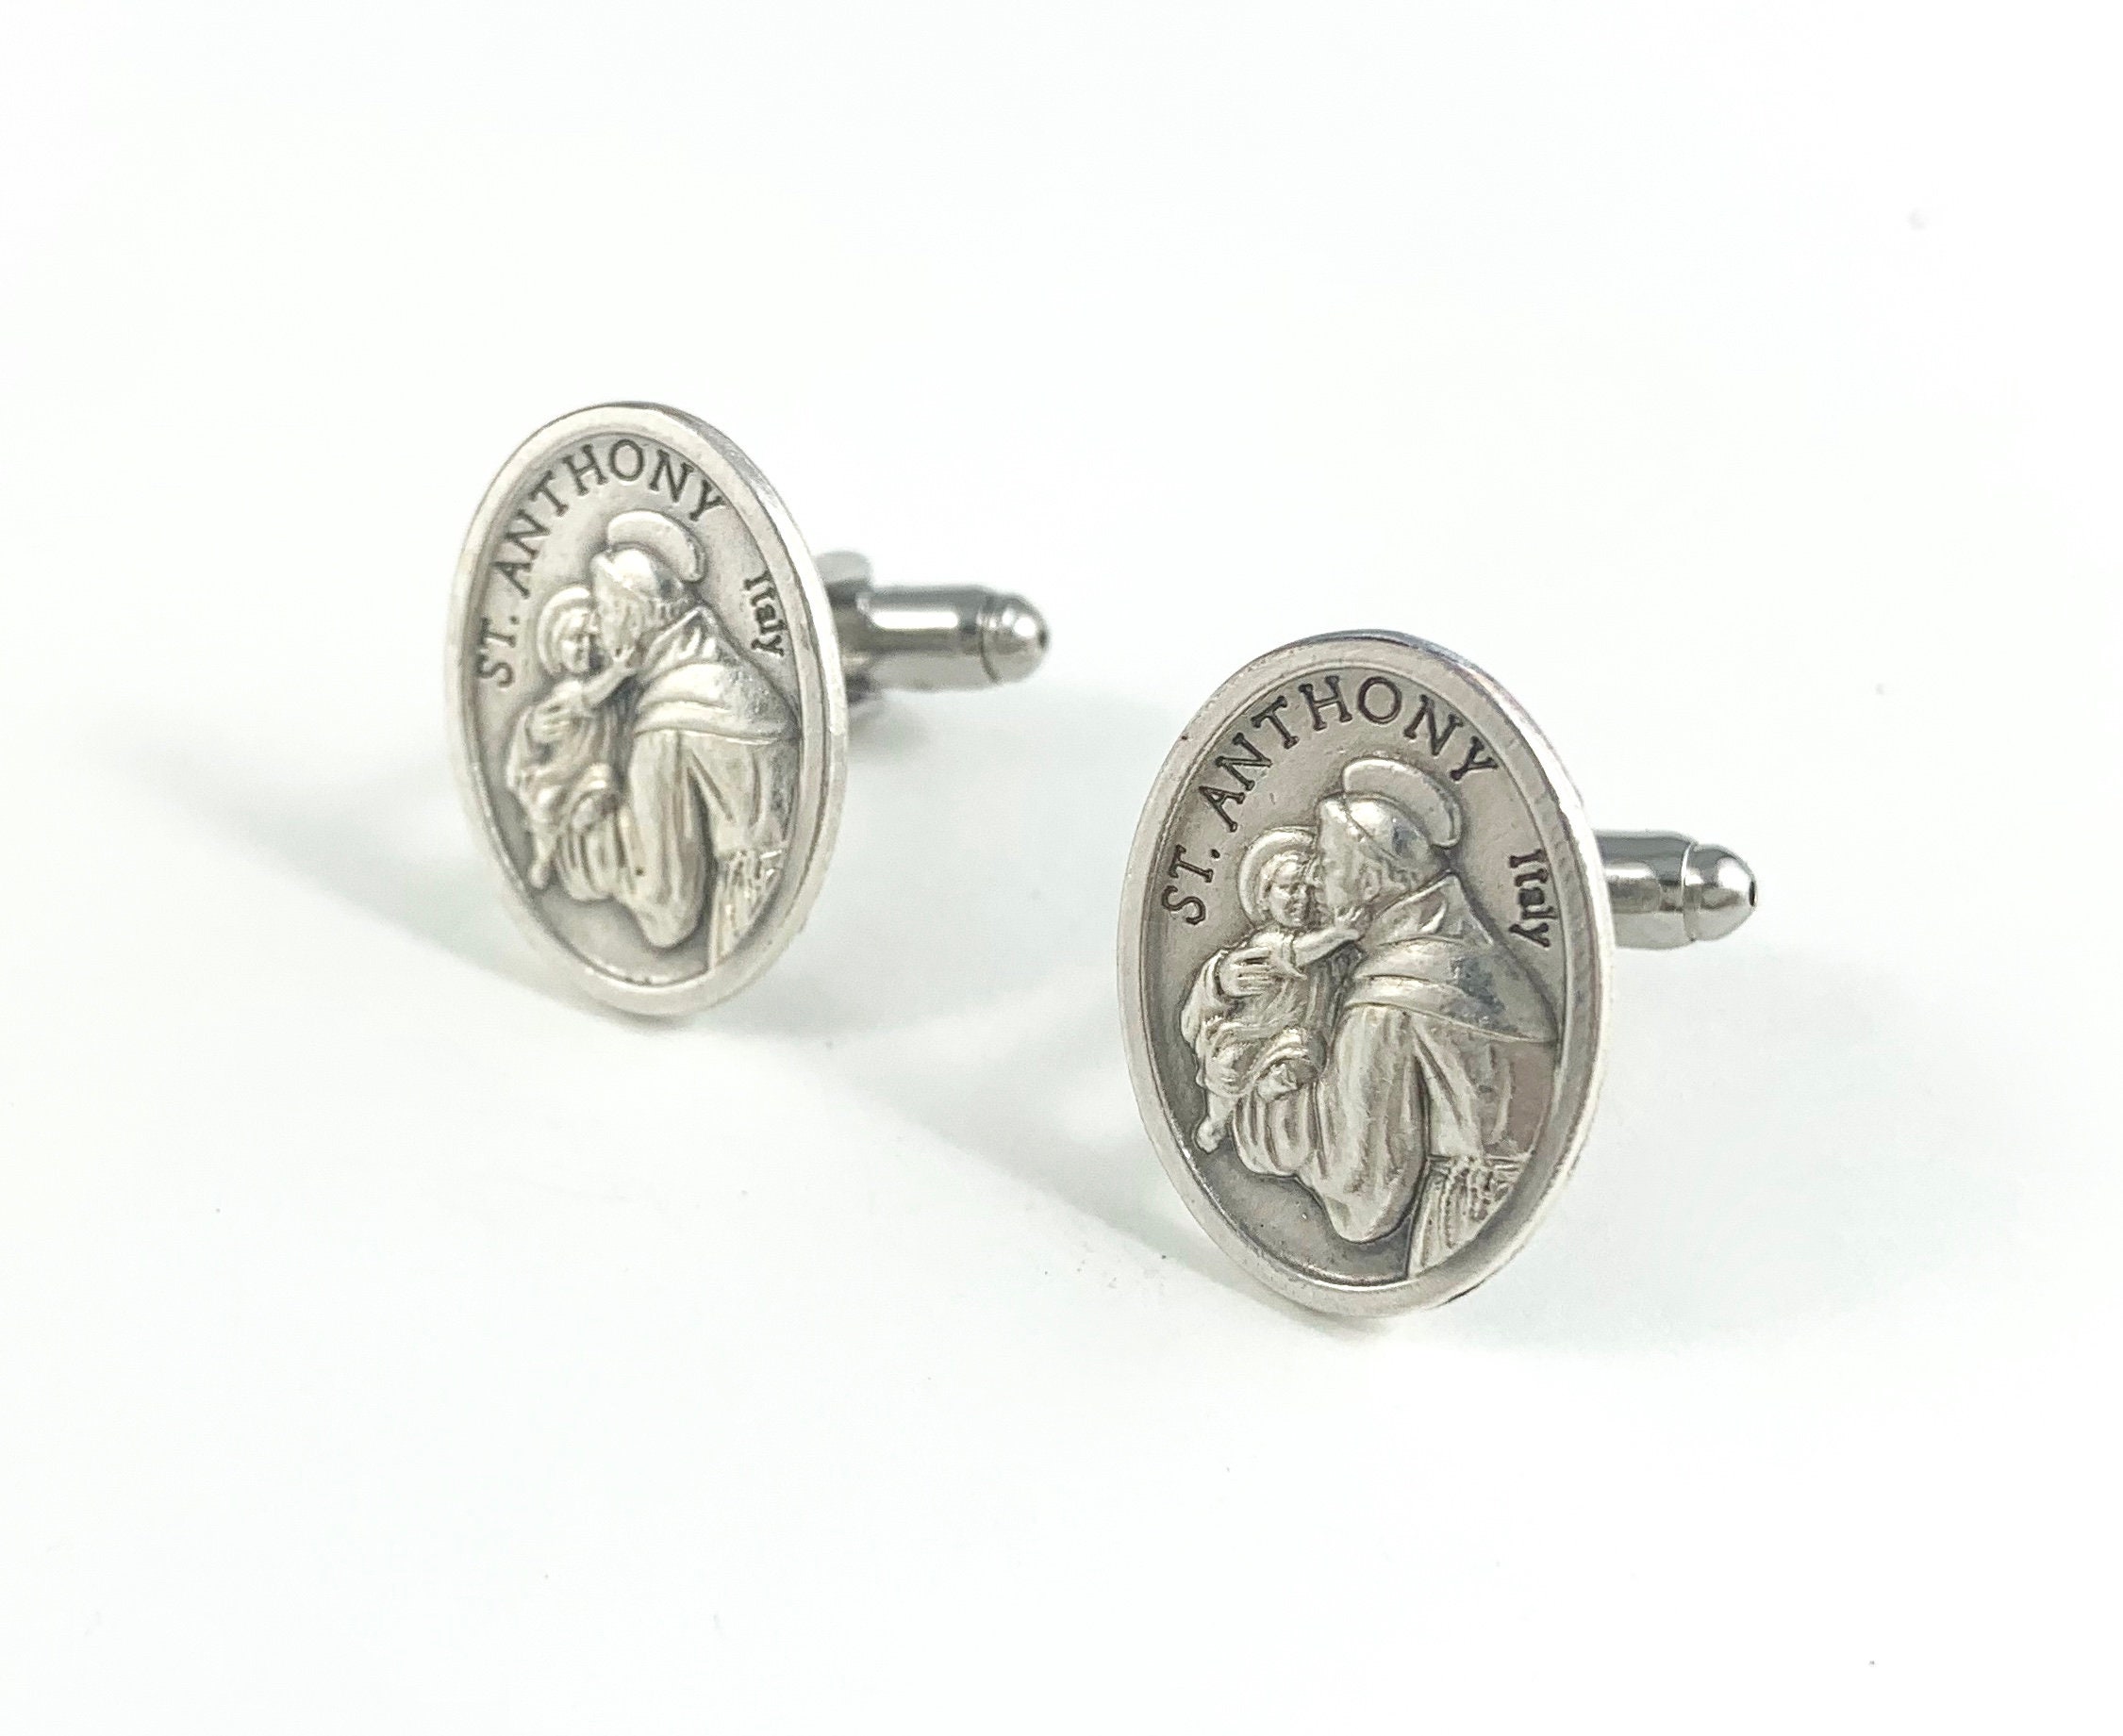 Mens Catholic Gifts Mens Gold Saint Anthony Cuff Links with St Anthony Medal Image & Lourdes Prayer Card